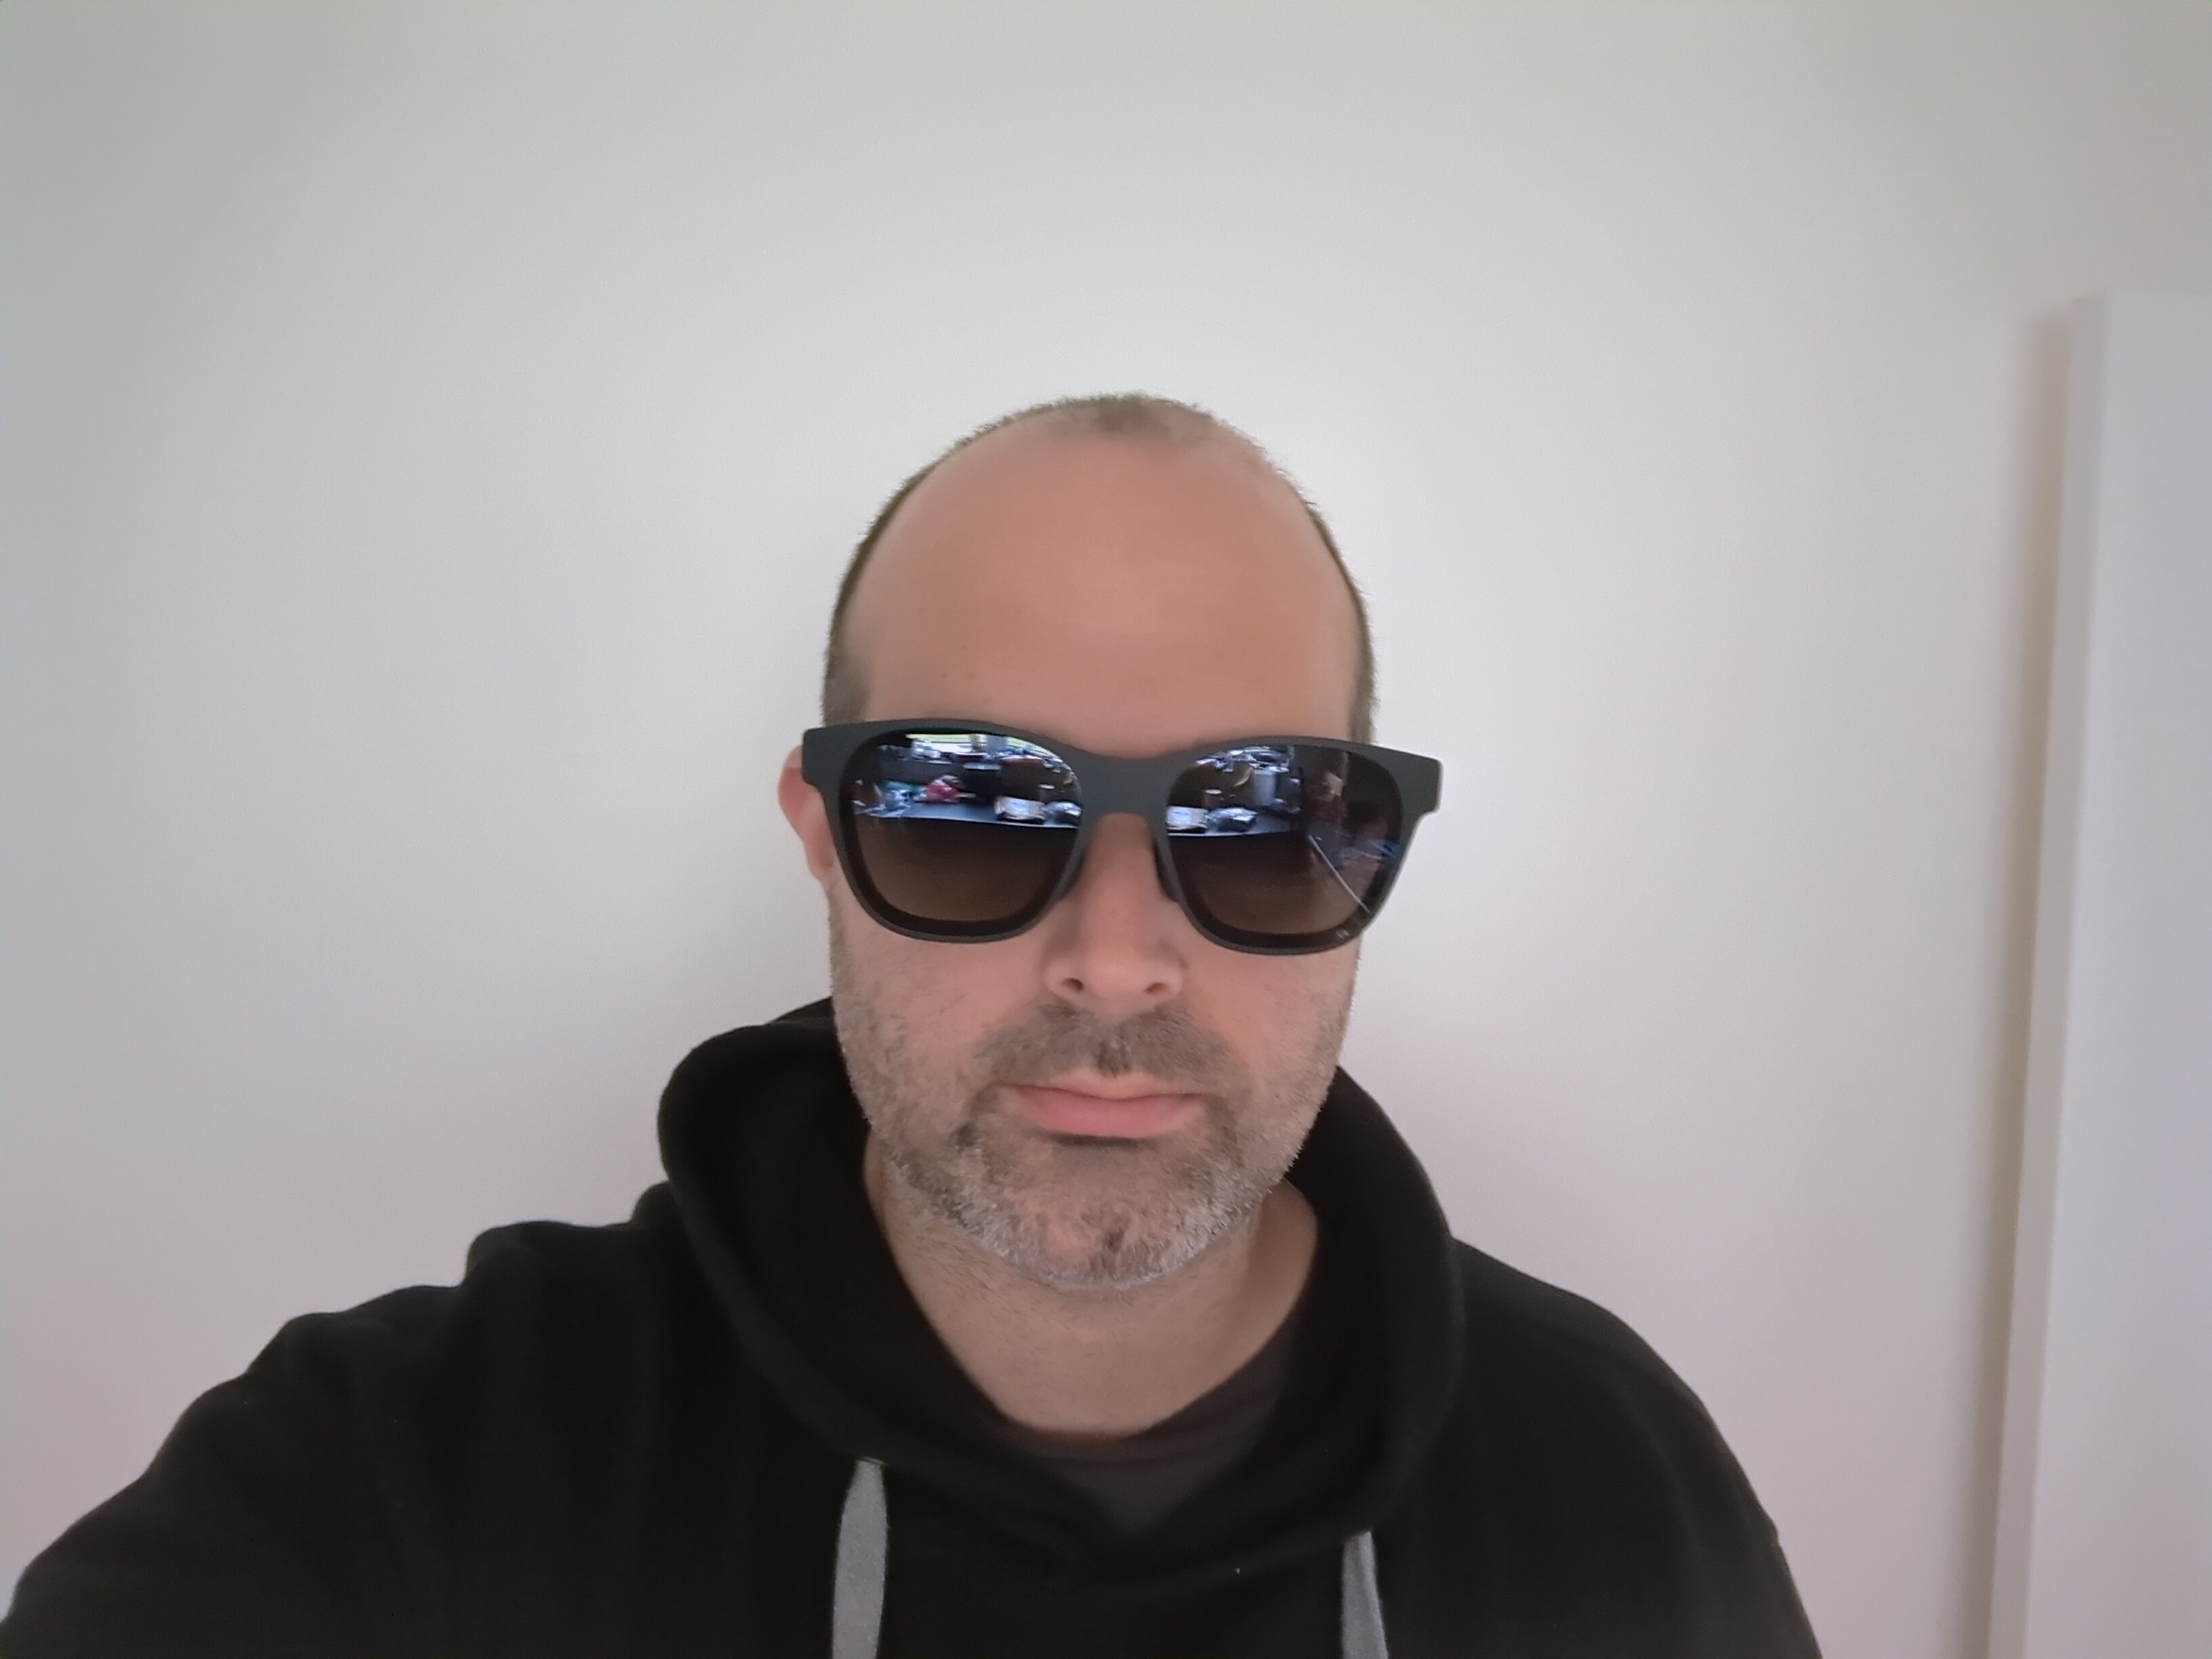 Photo of me - white man, not much hair, black hoodie - wearing a pair of Xreal glasses. They look like large black sunglasses.